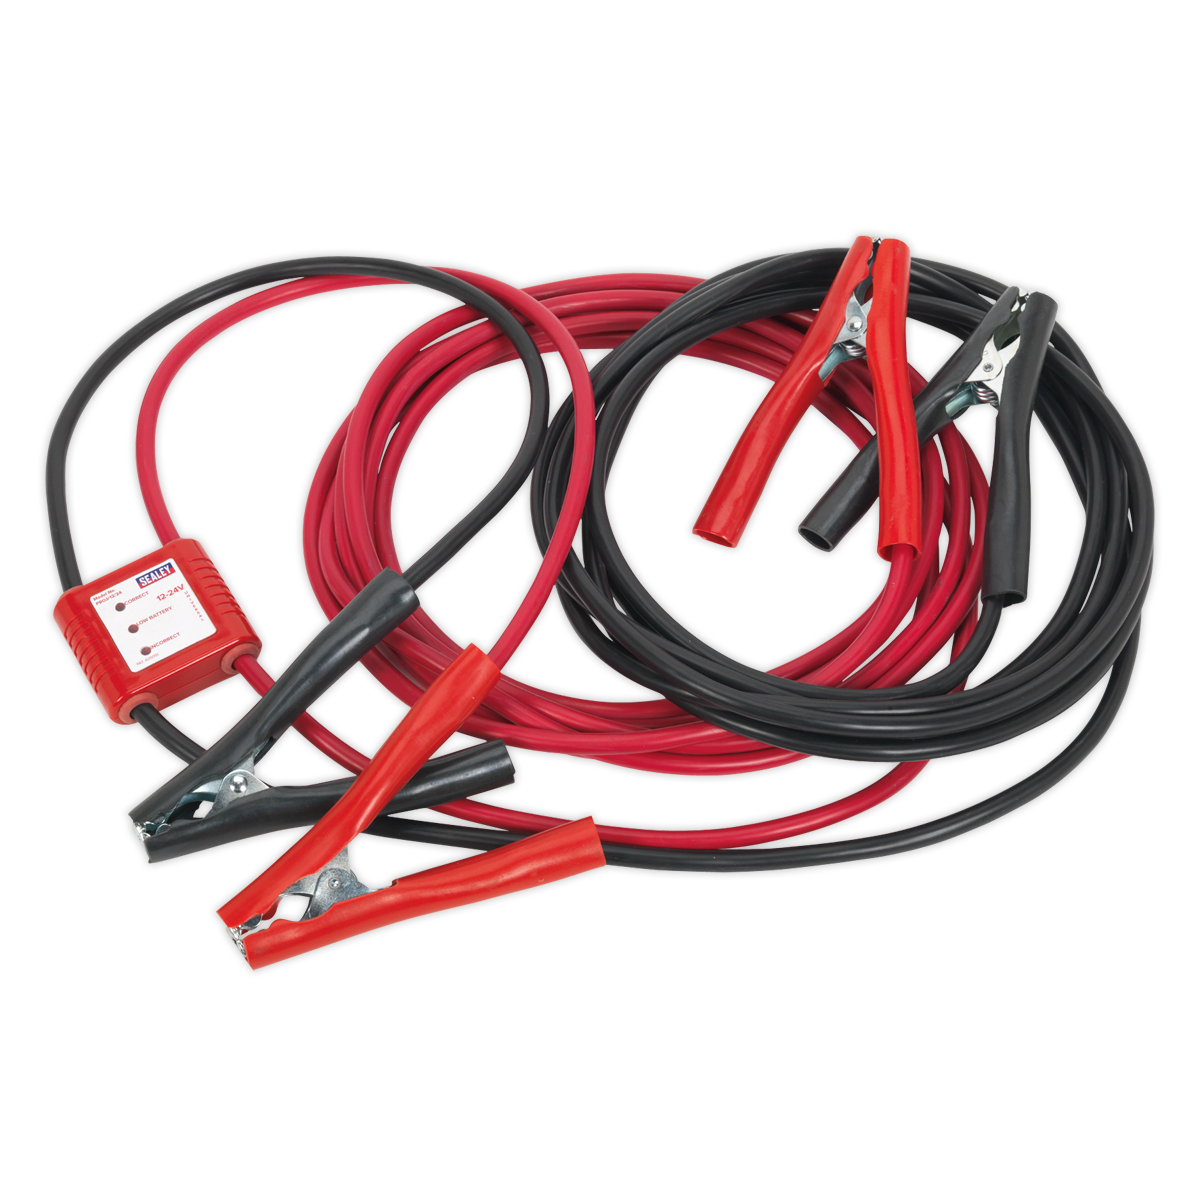 Booster Cables 7m 450A 25mm² with 12/24V Electronics Protection - PROJ/12/24 - Farming Parts